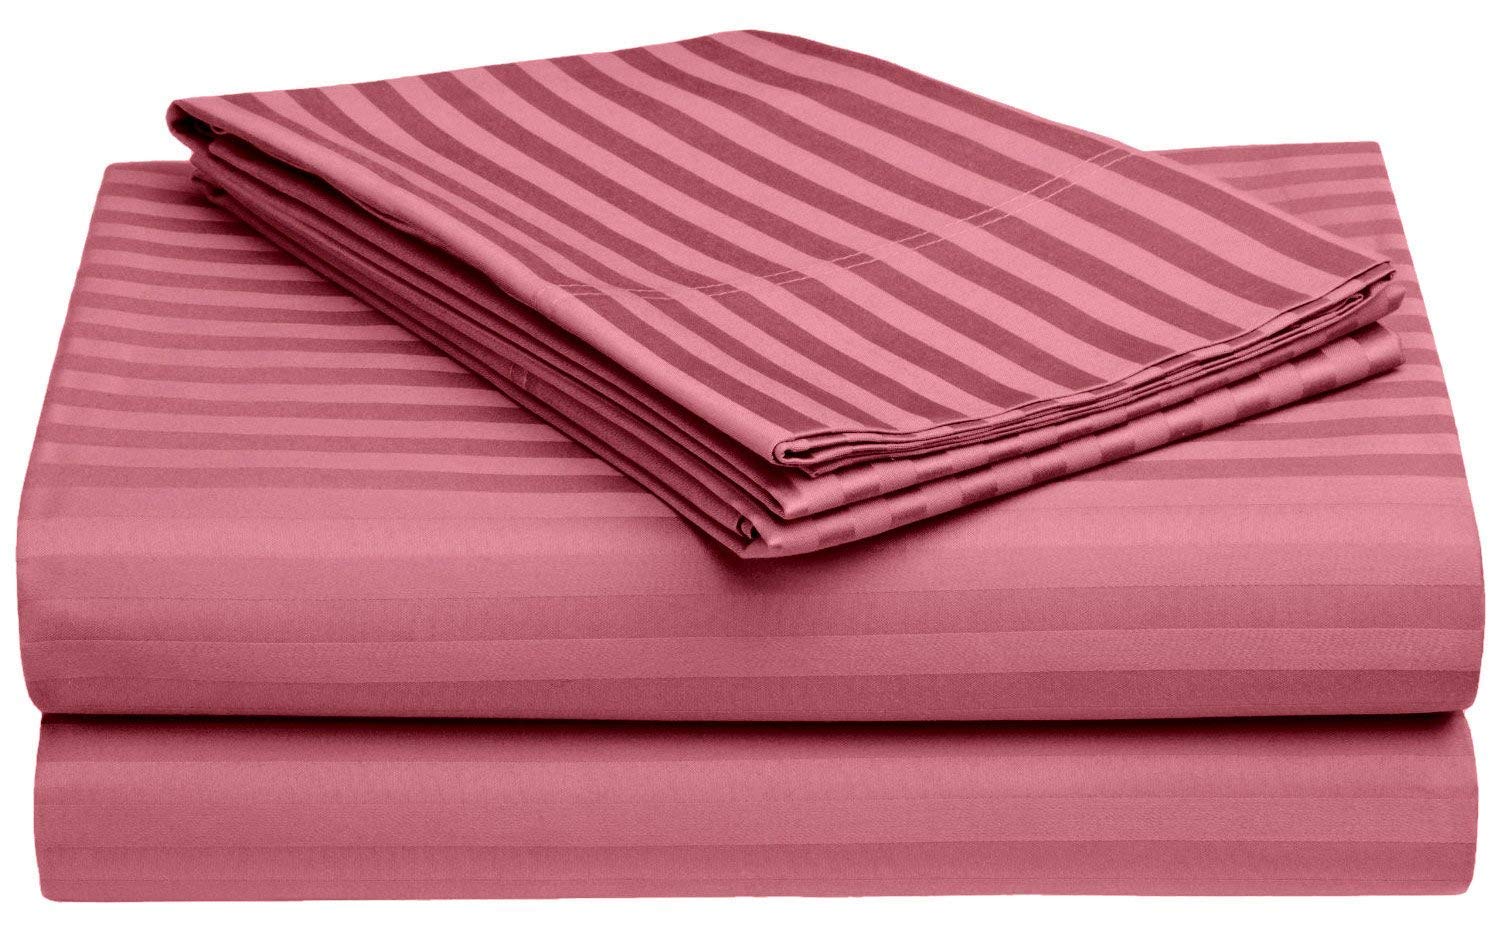 Peach Self Design 300 TC King Size Pure Cotton Satin Slumber Sheet for Double Bed with 2 pillow covers